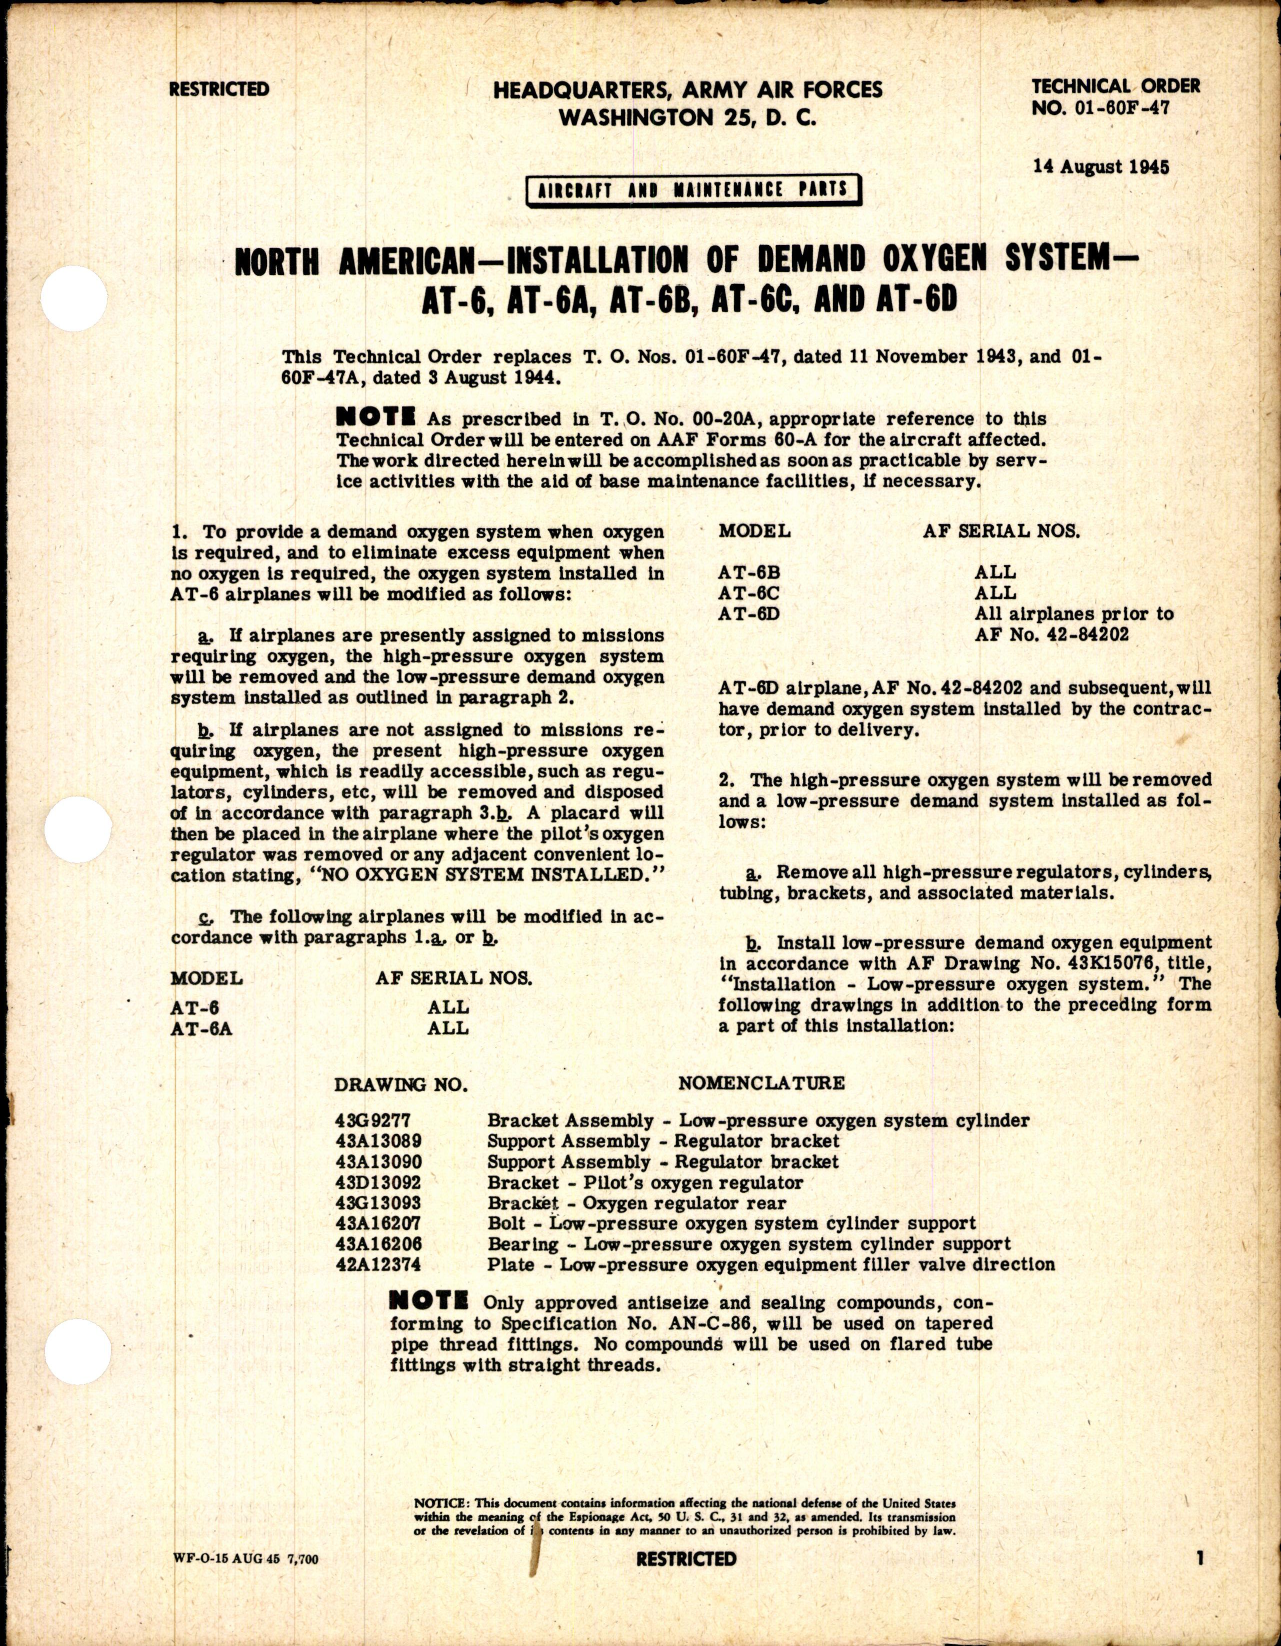 Sample page 1 from AirCorps Library document: Installation of Demand Oxygen System for AT-6, AT-6A, AT-6B, AT-6C, and AT-6D